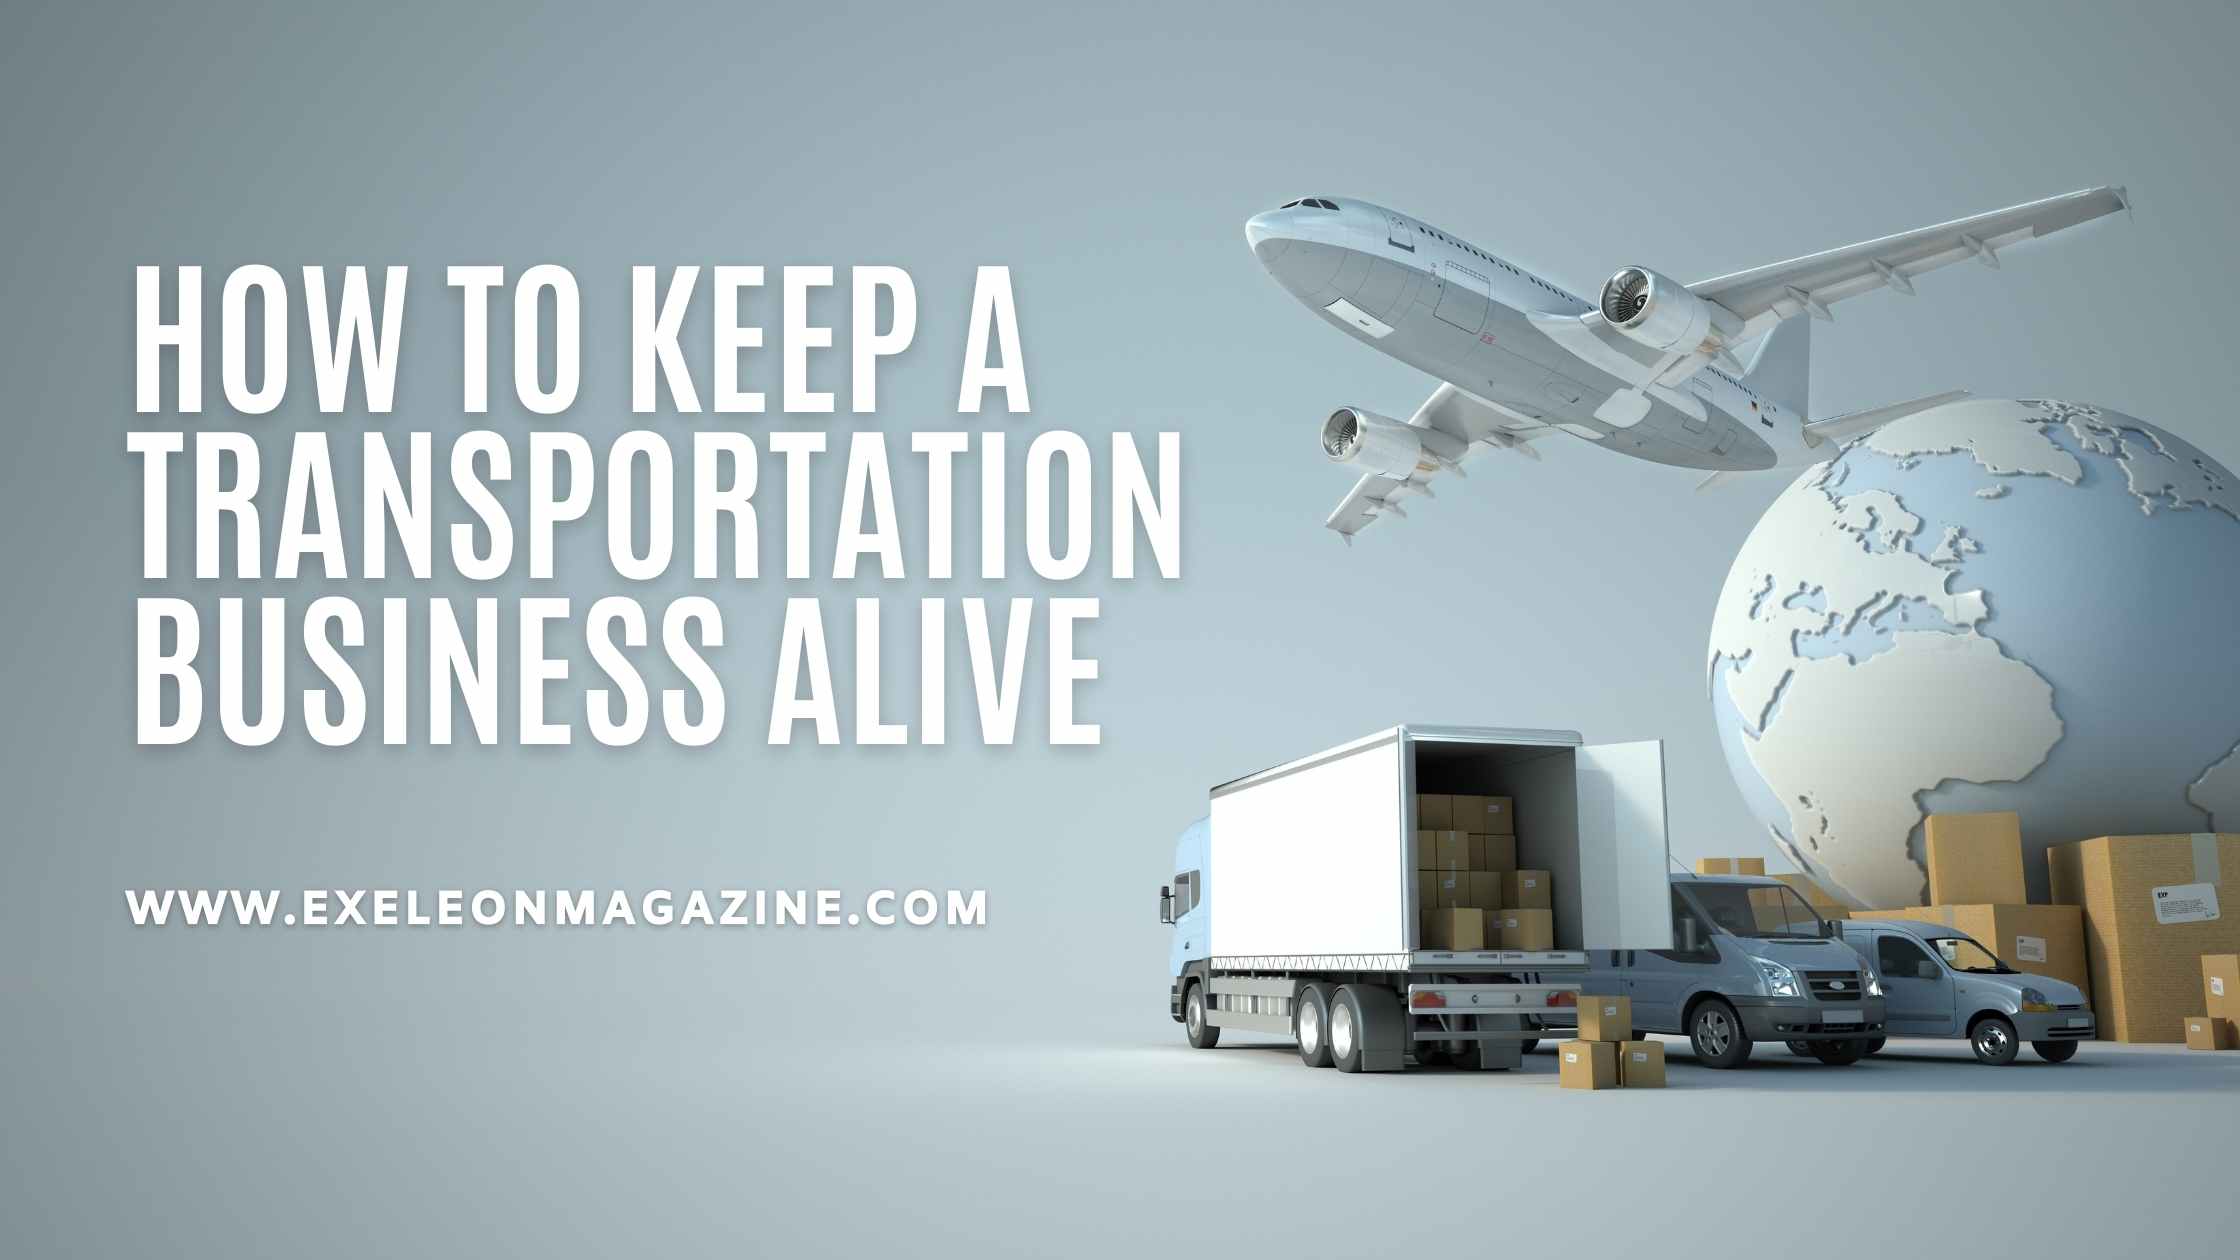 How to Keep a Transportation Business Alive